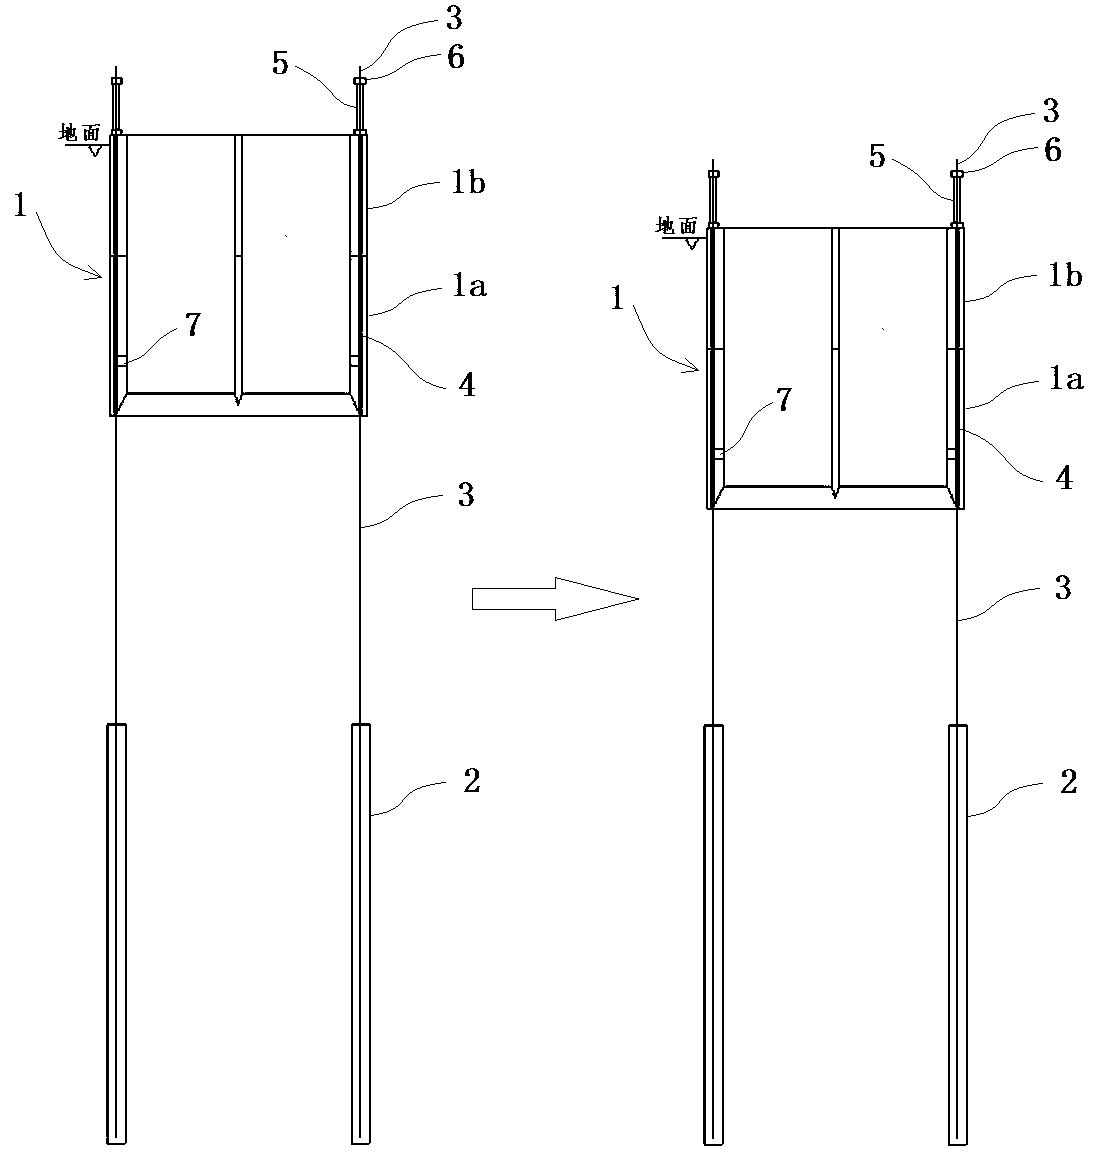 Construction method for pile-anchor press-in caisson sinking